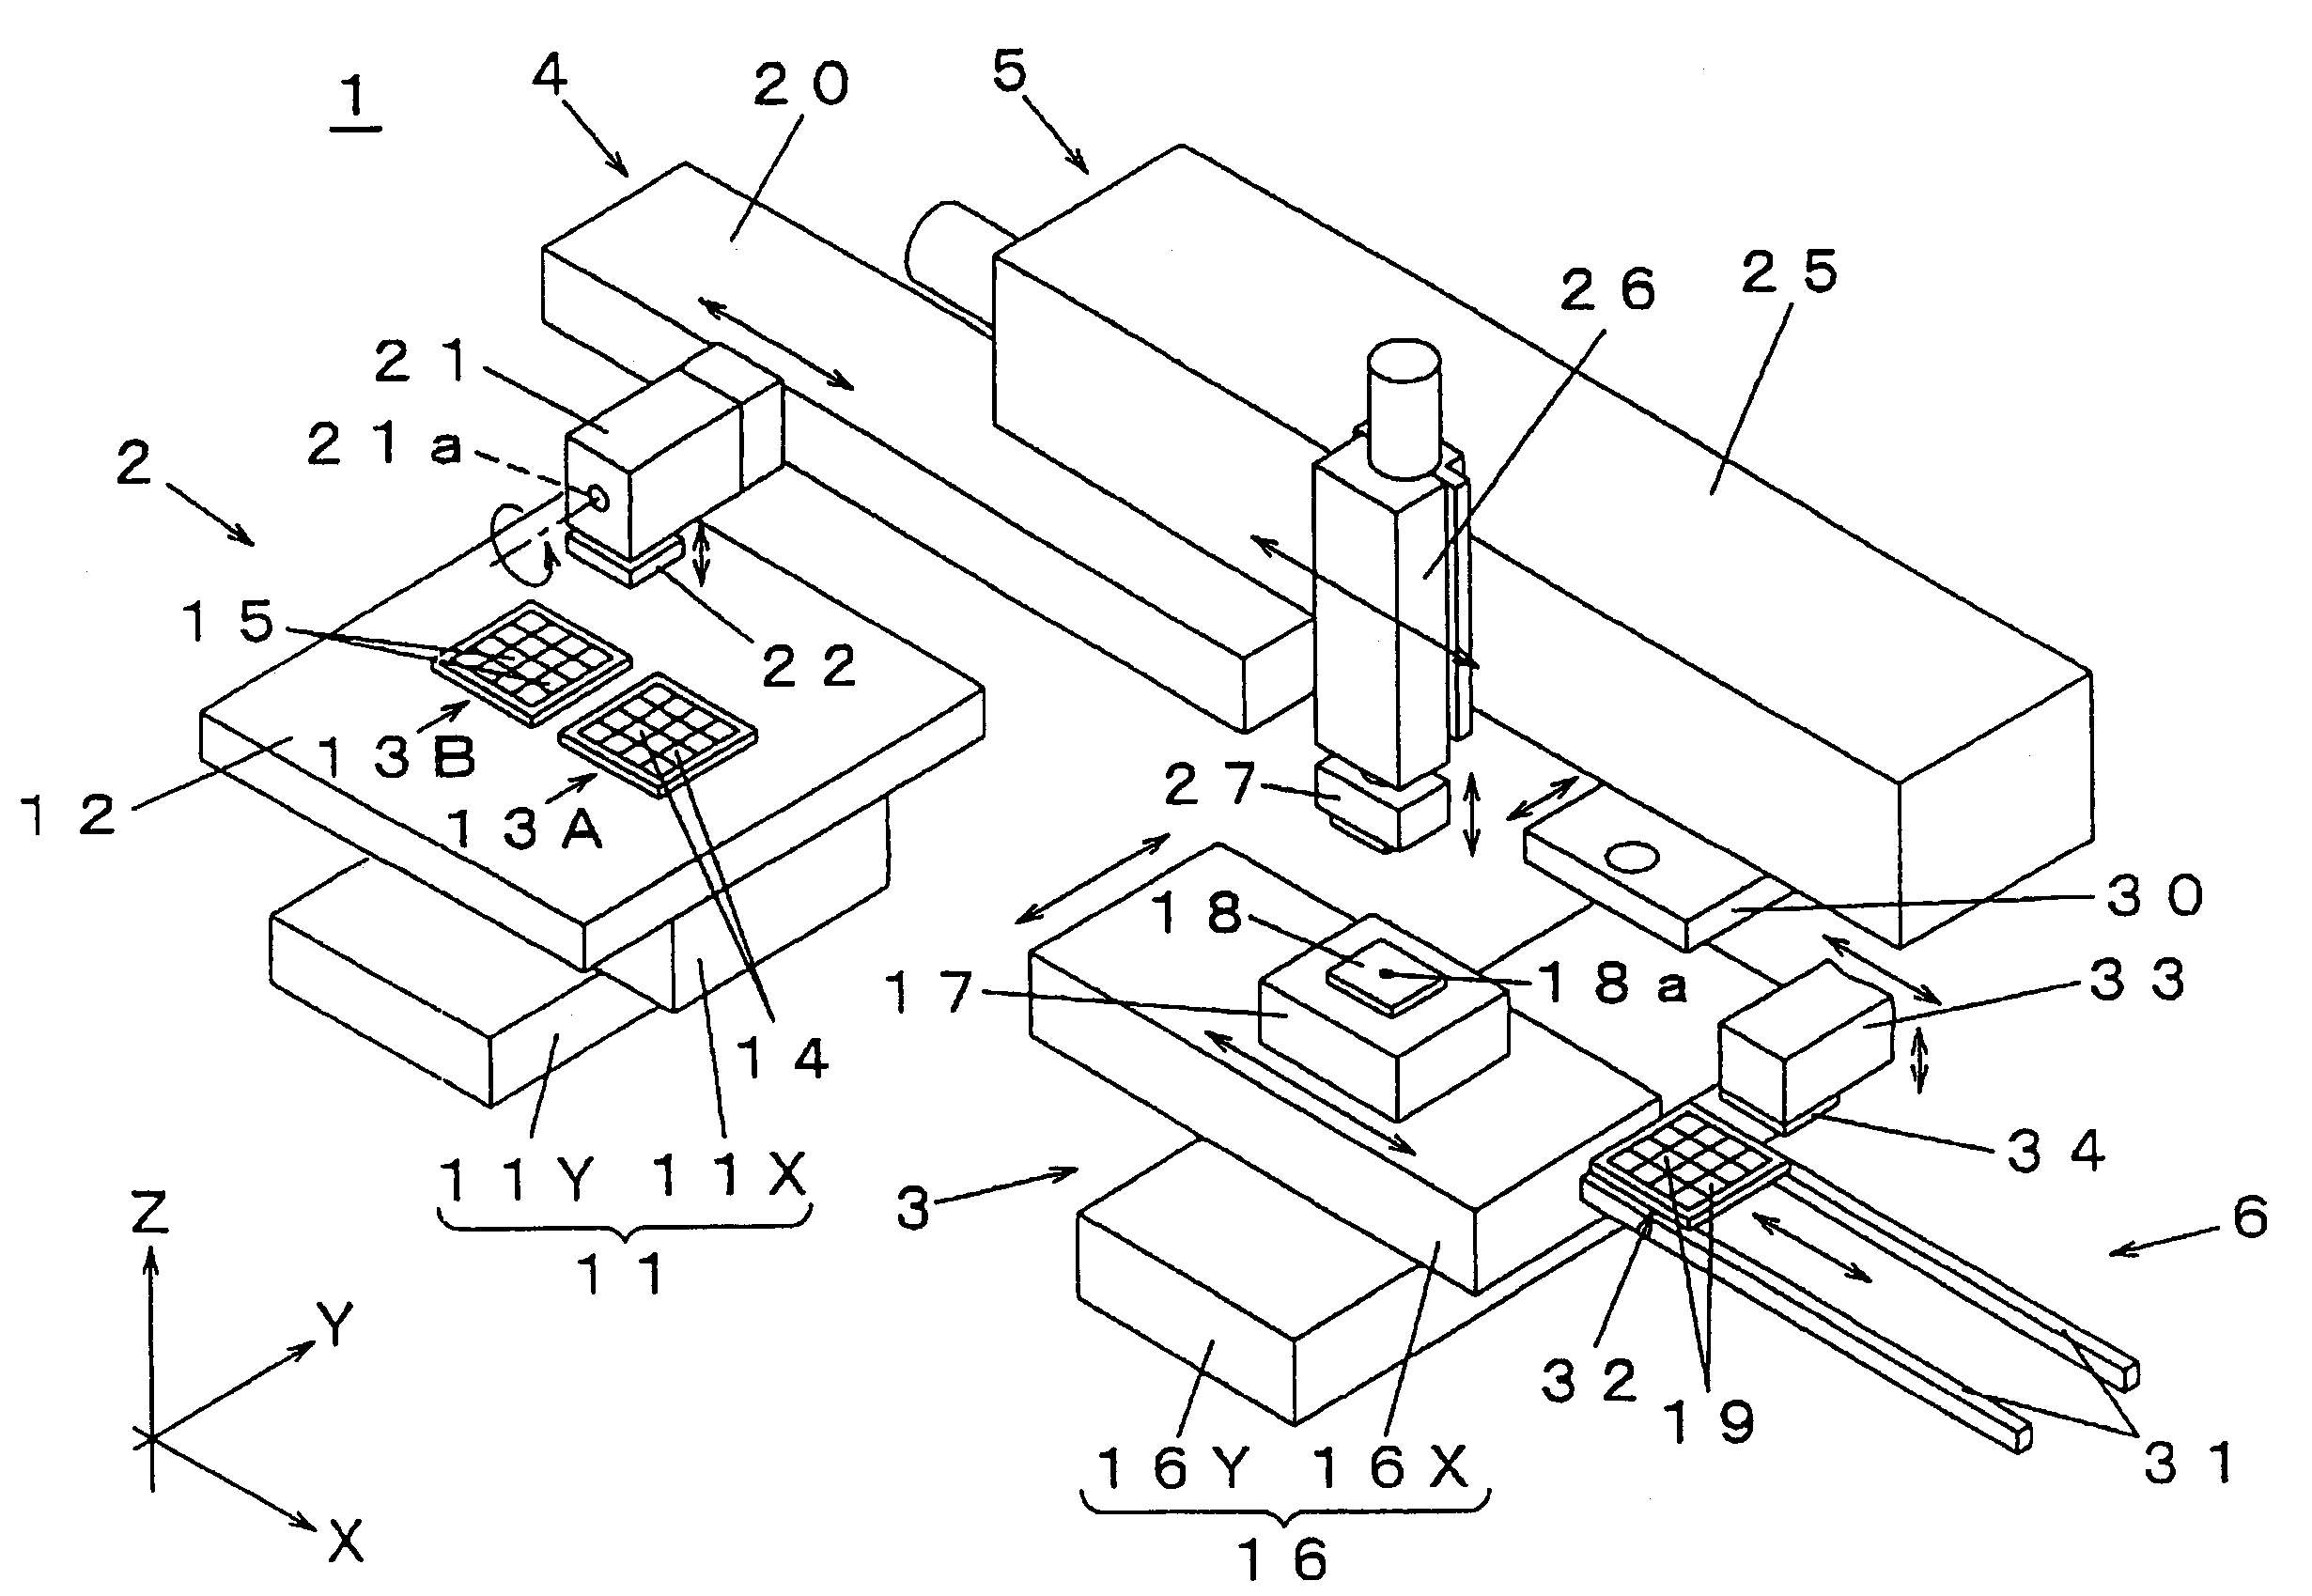 Component mounting method